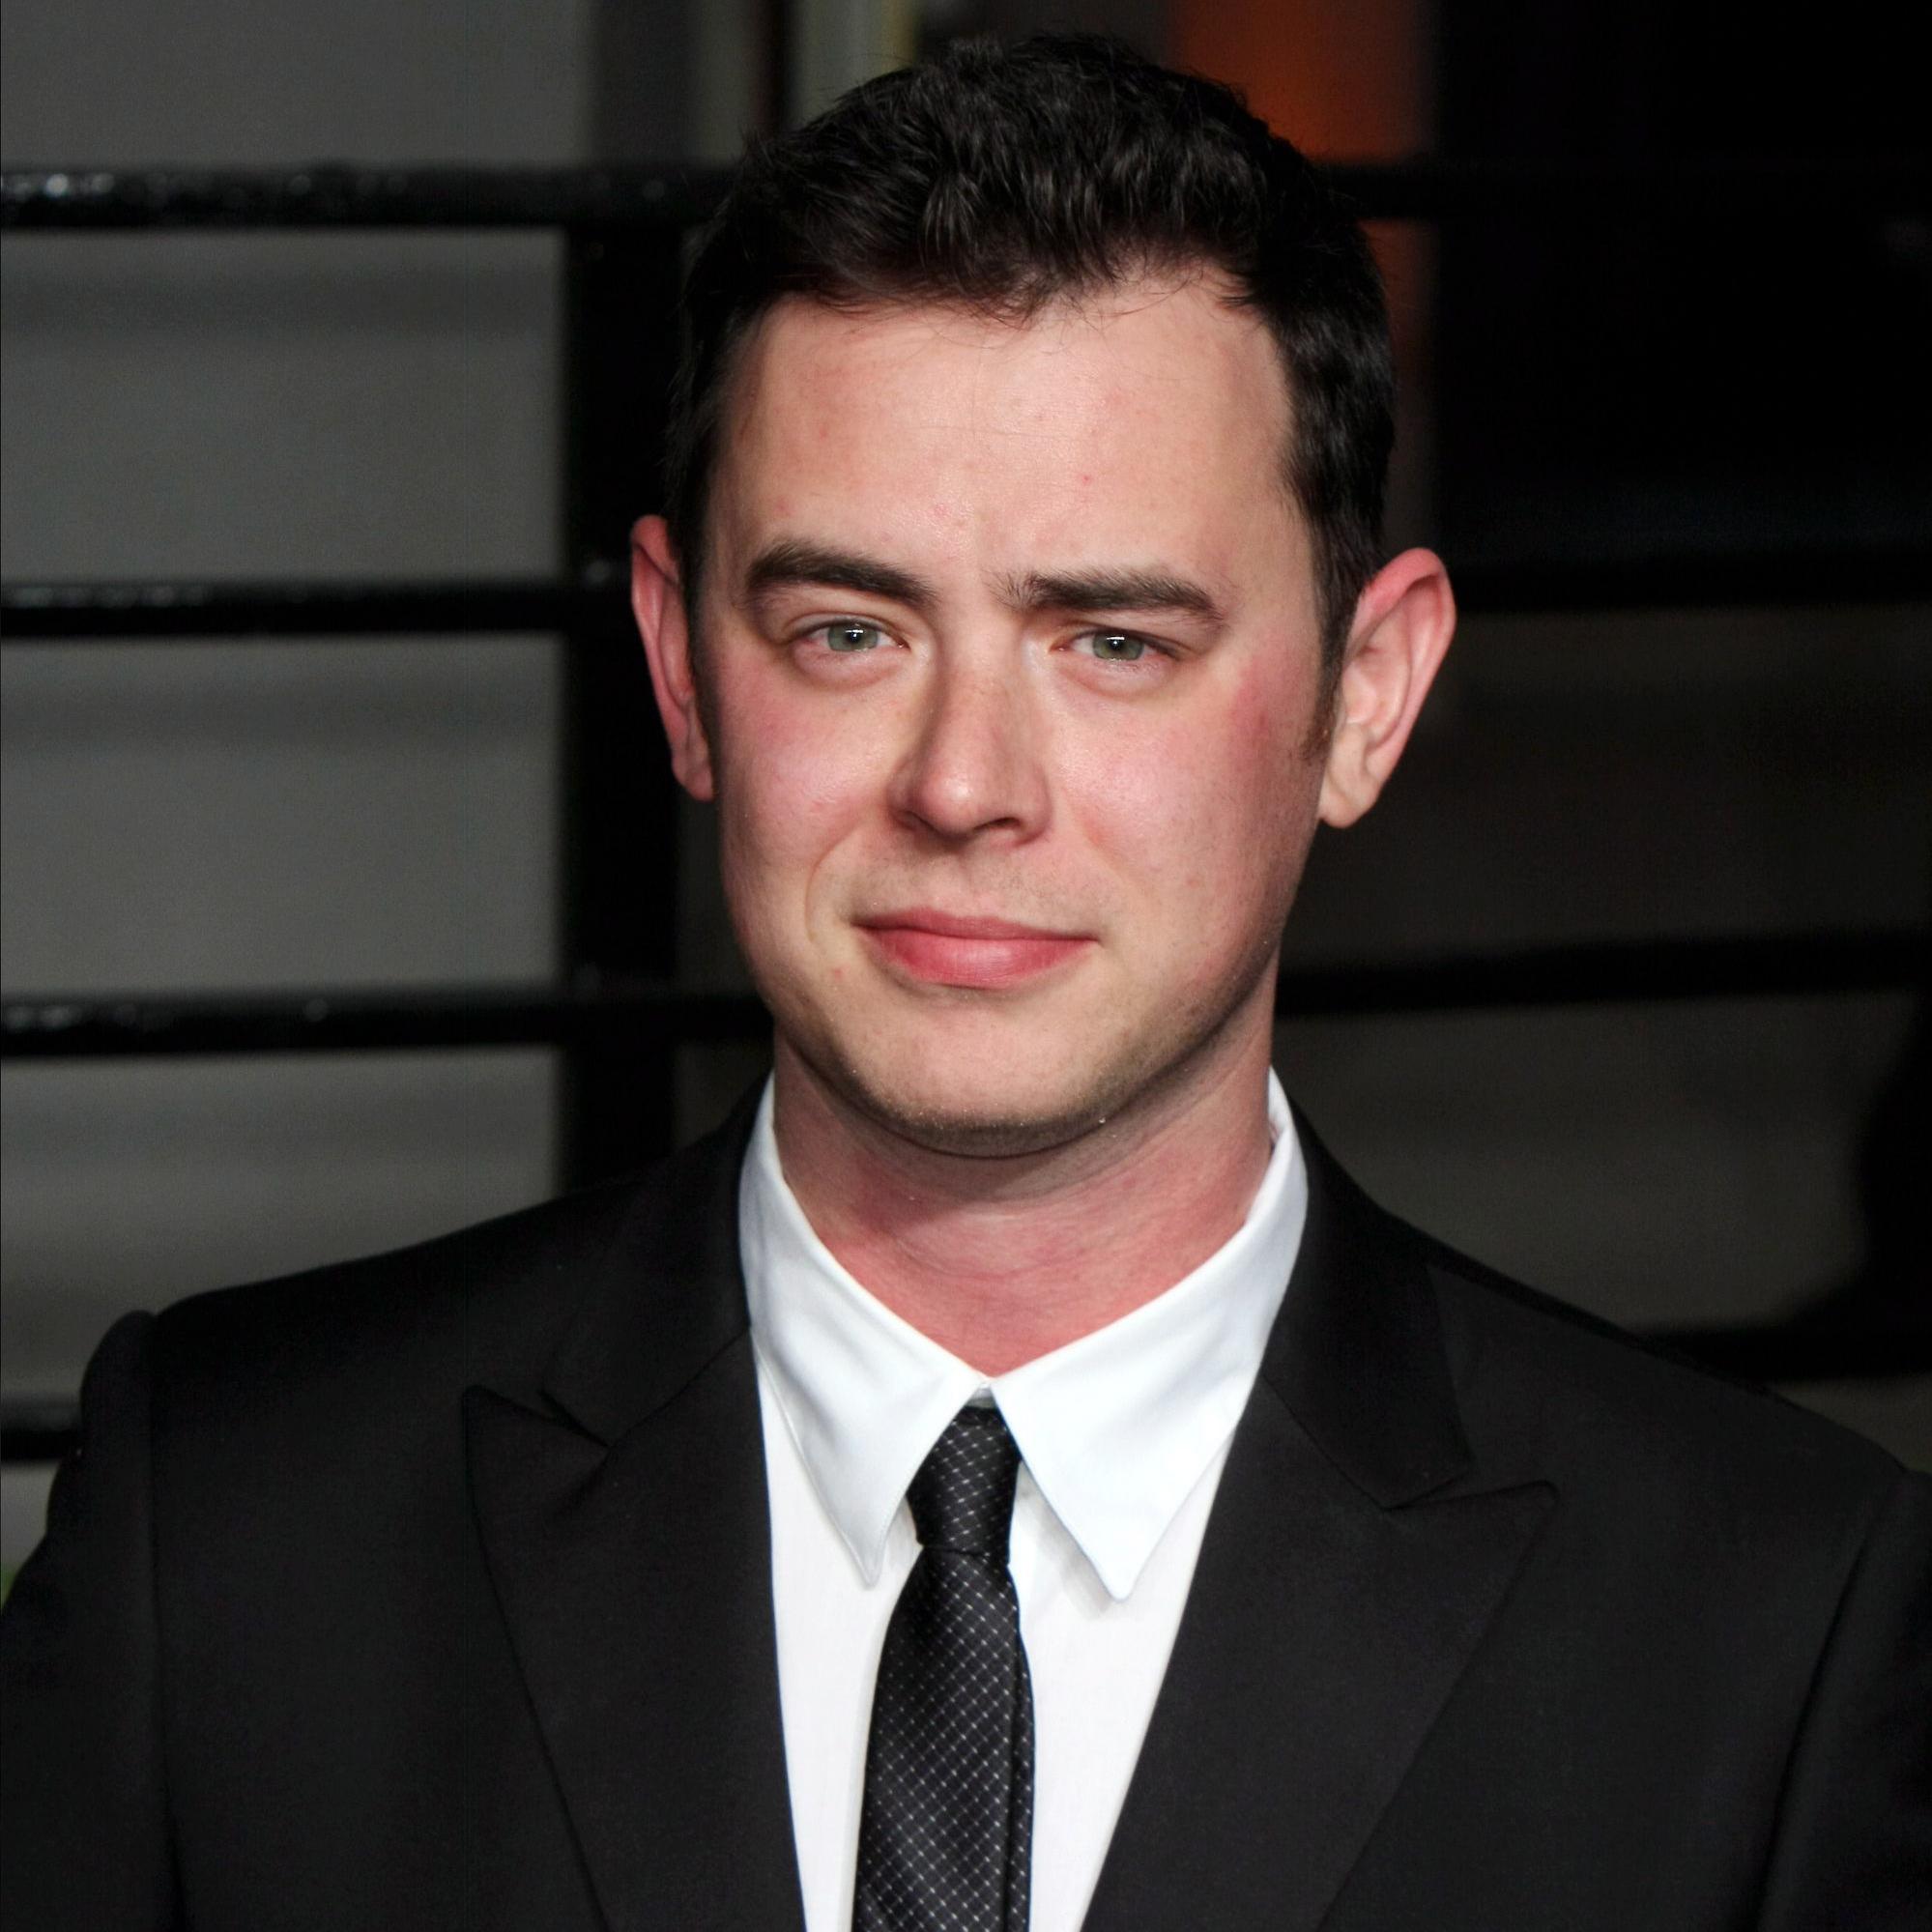 Pictures of Colin Hanks - Pictures Of Celebrities1999 x 1999